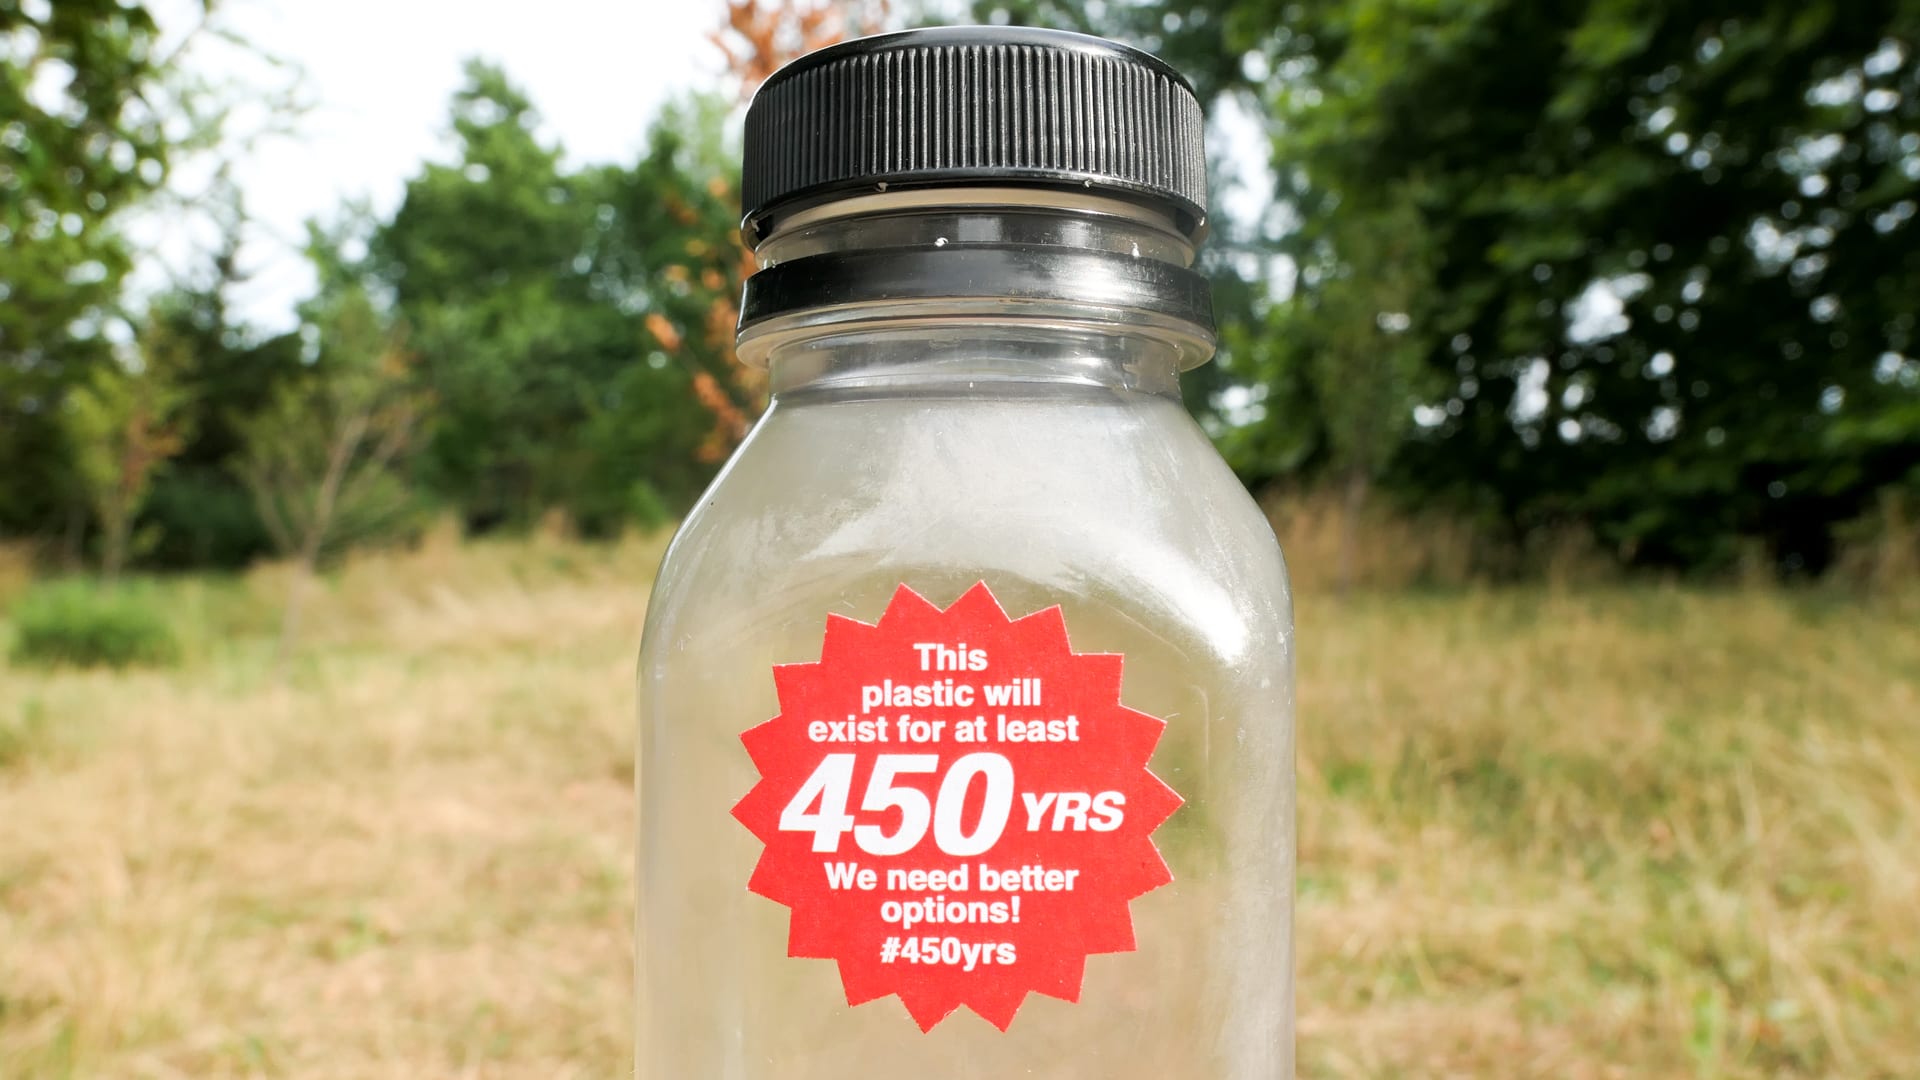 Photograph of a single-use plastic bottle with a red, starburst-shaped 1.25 inch sticker on it that says: 'This plastic will exist for at least 450 years.
        We need better options #450yrs.' In the background, behind the bottle, is a green field.